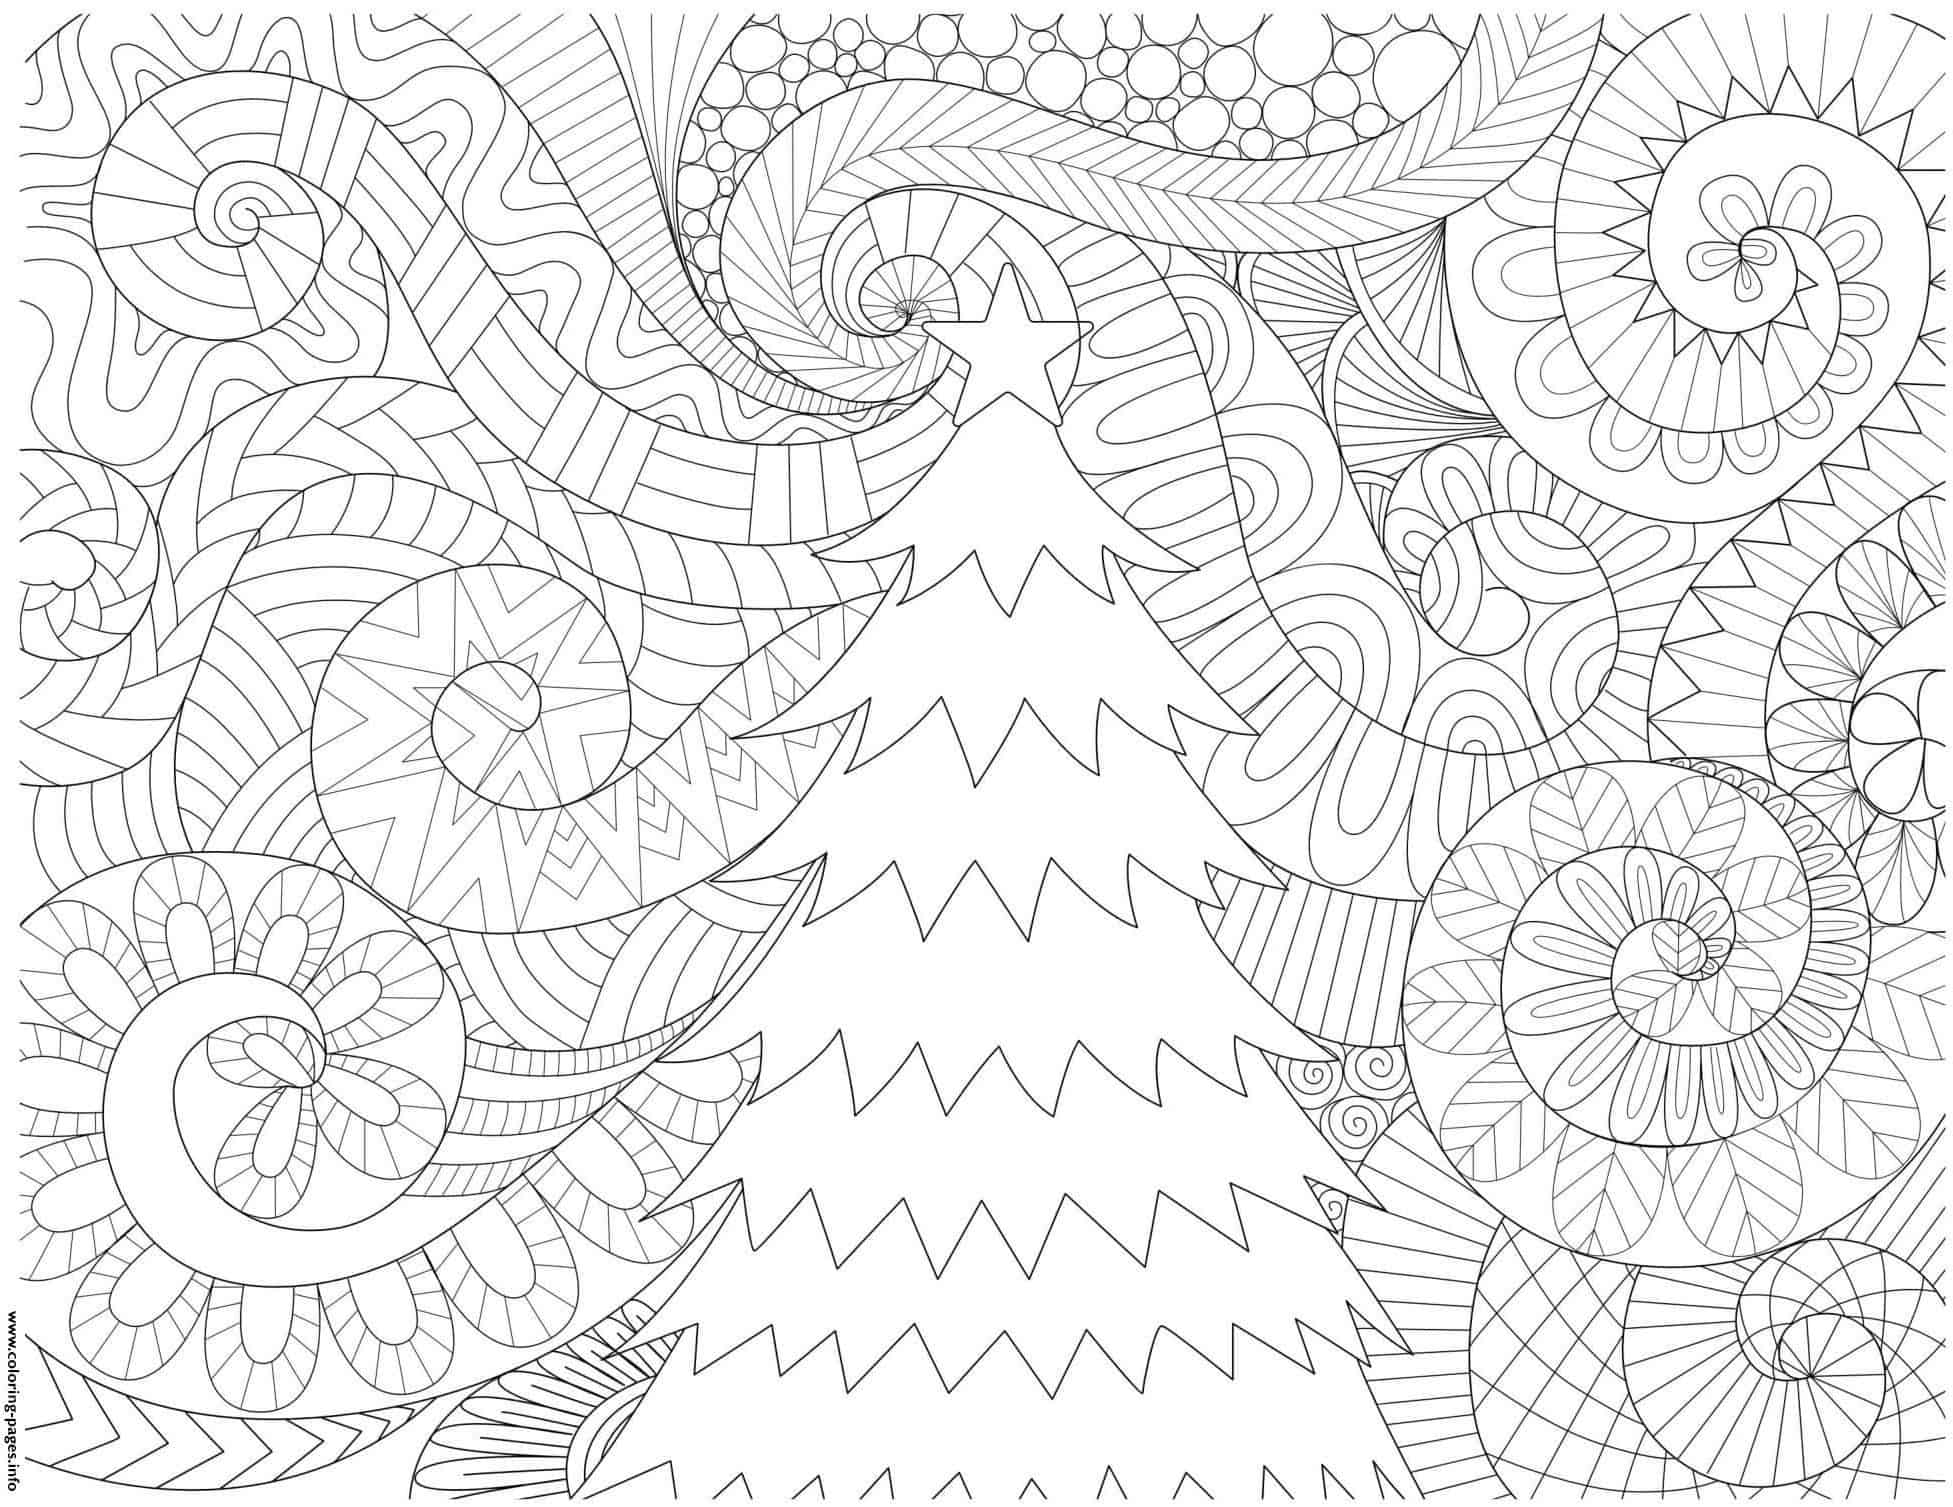 Free & Easy To Print Adult Christmas Coloring Pages - Tulamama